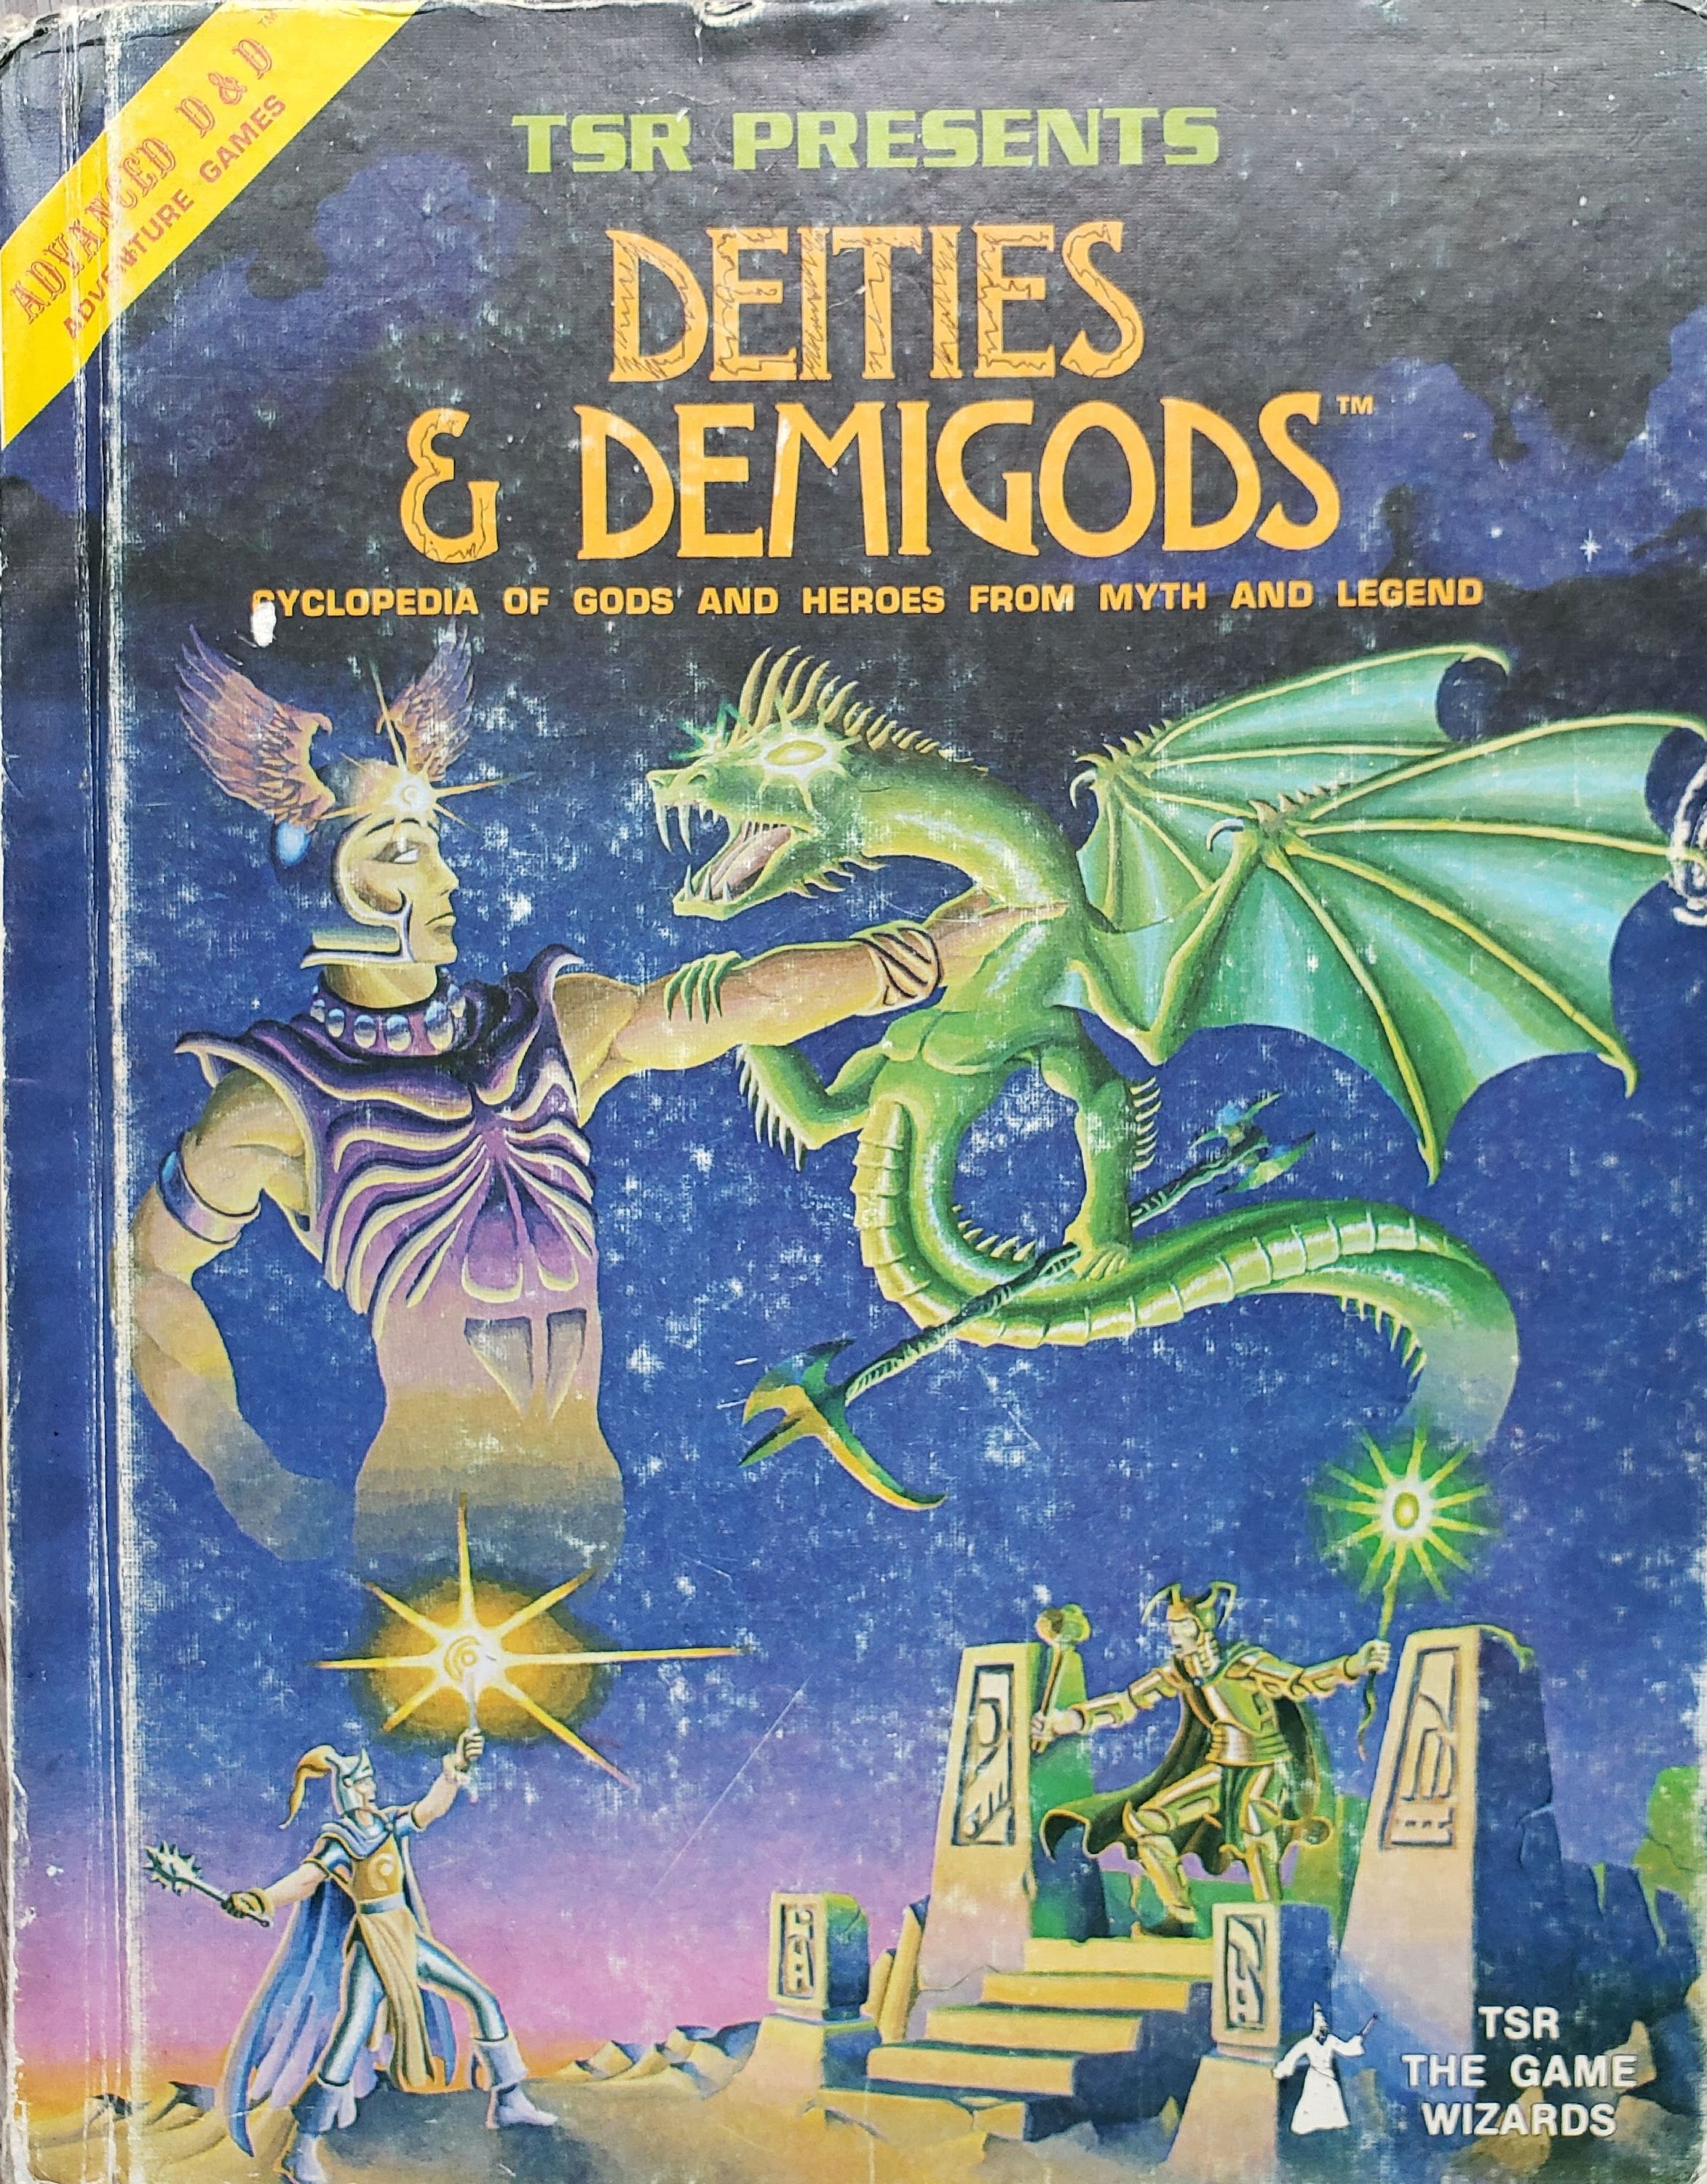 The front cover of a beaten copy of Deities & Demigods, with a dent on the top and wear along the spine and across the surface. There are some pen marks around the title.